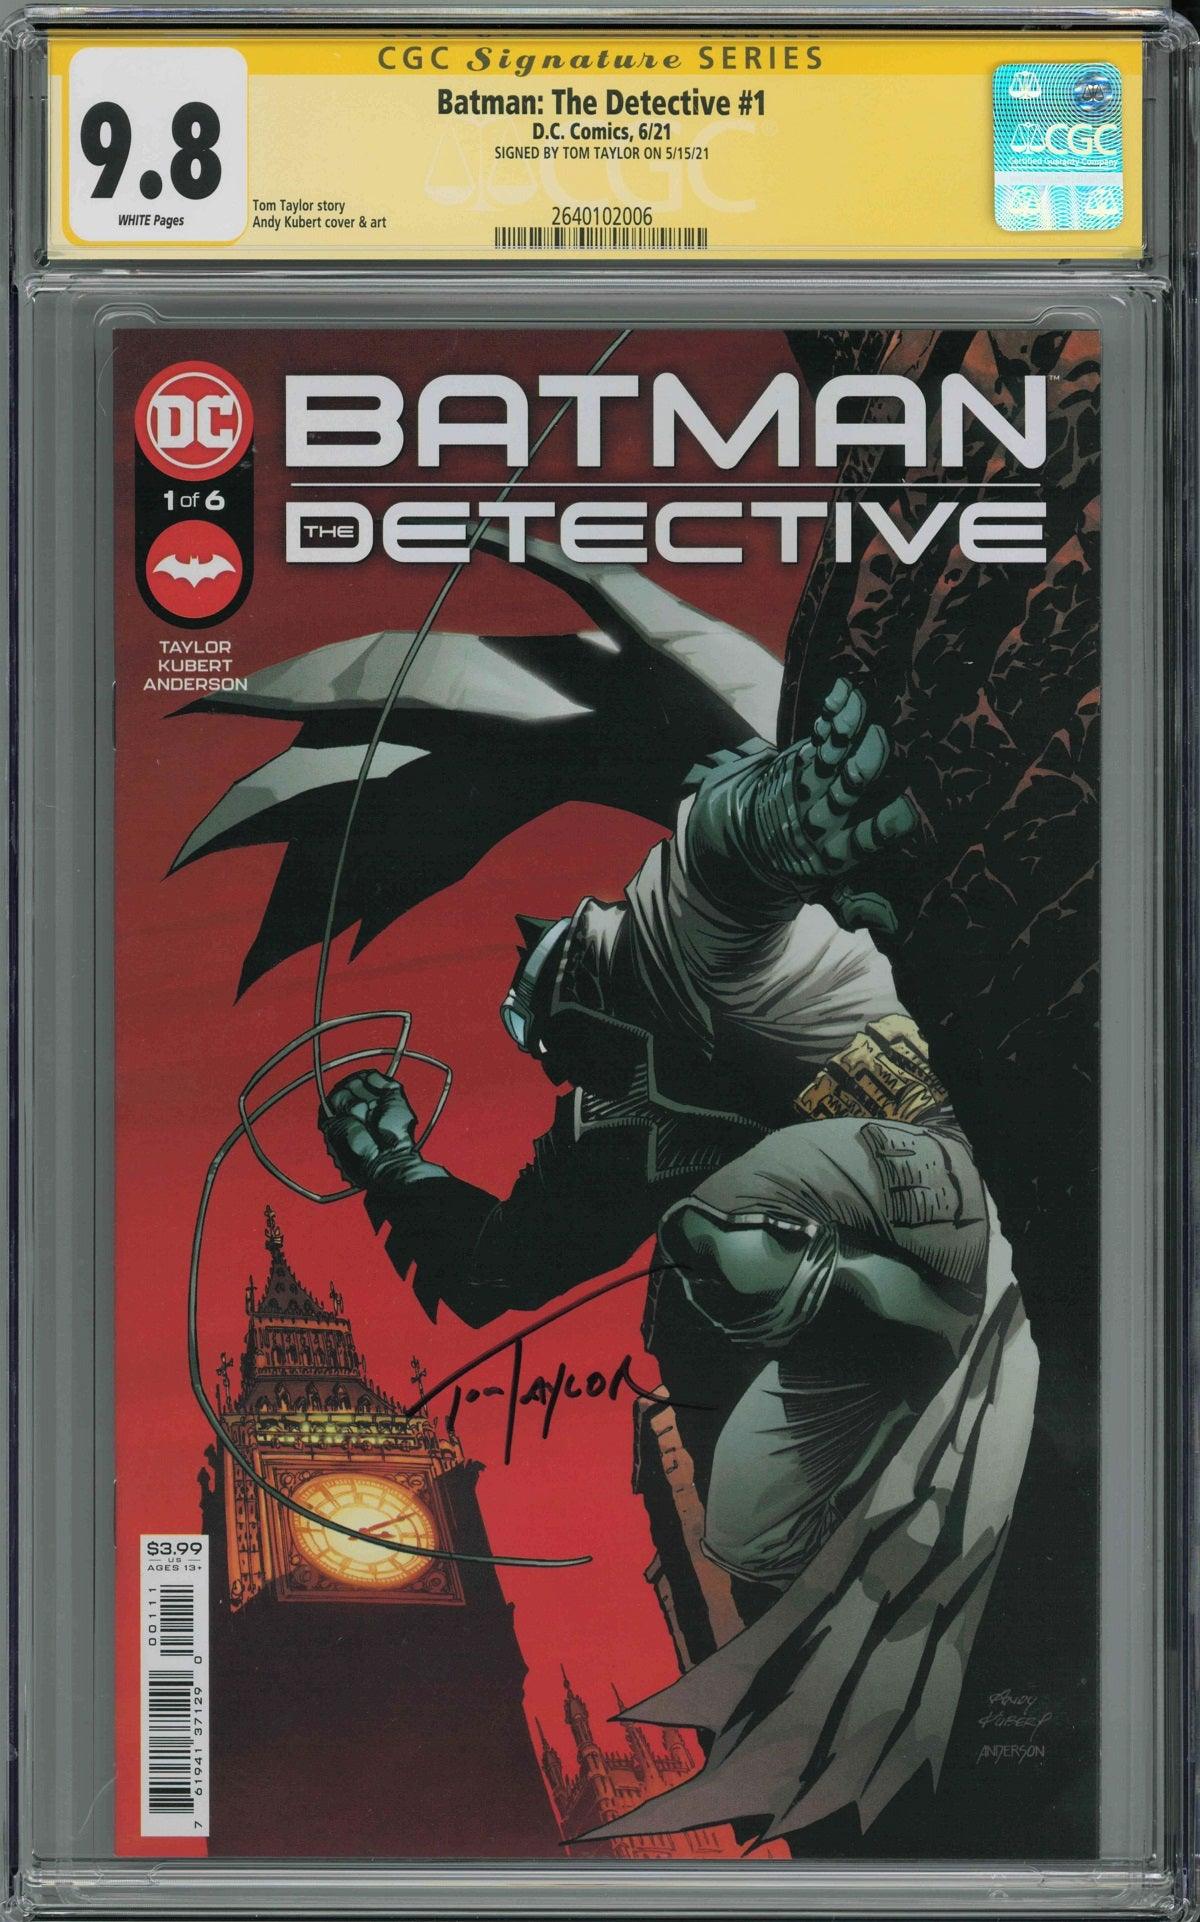 CGC BATMAN: THE DETECTIVE #1 (9.8) SIGNATURE SERIES - SIGNED BY TOM TAYLOR - Kings Comics